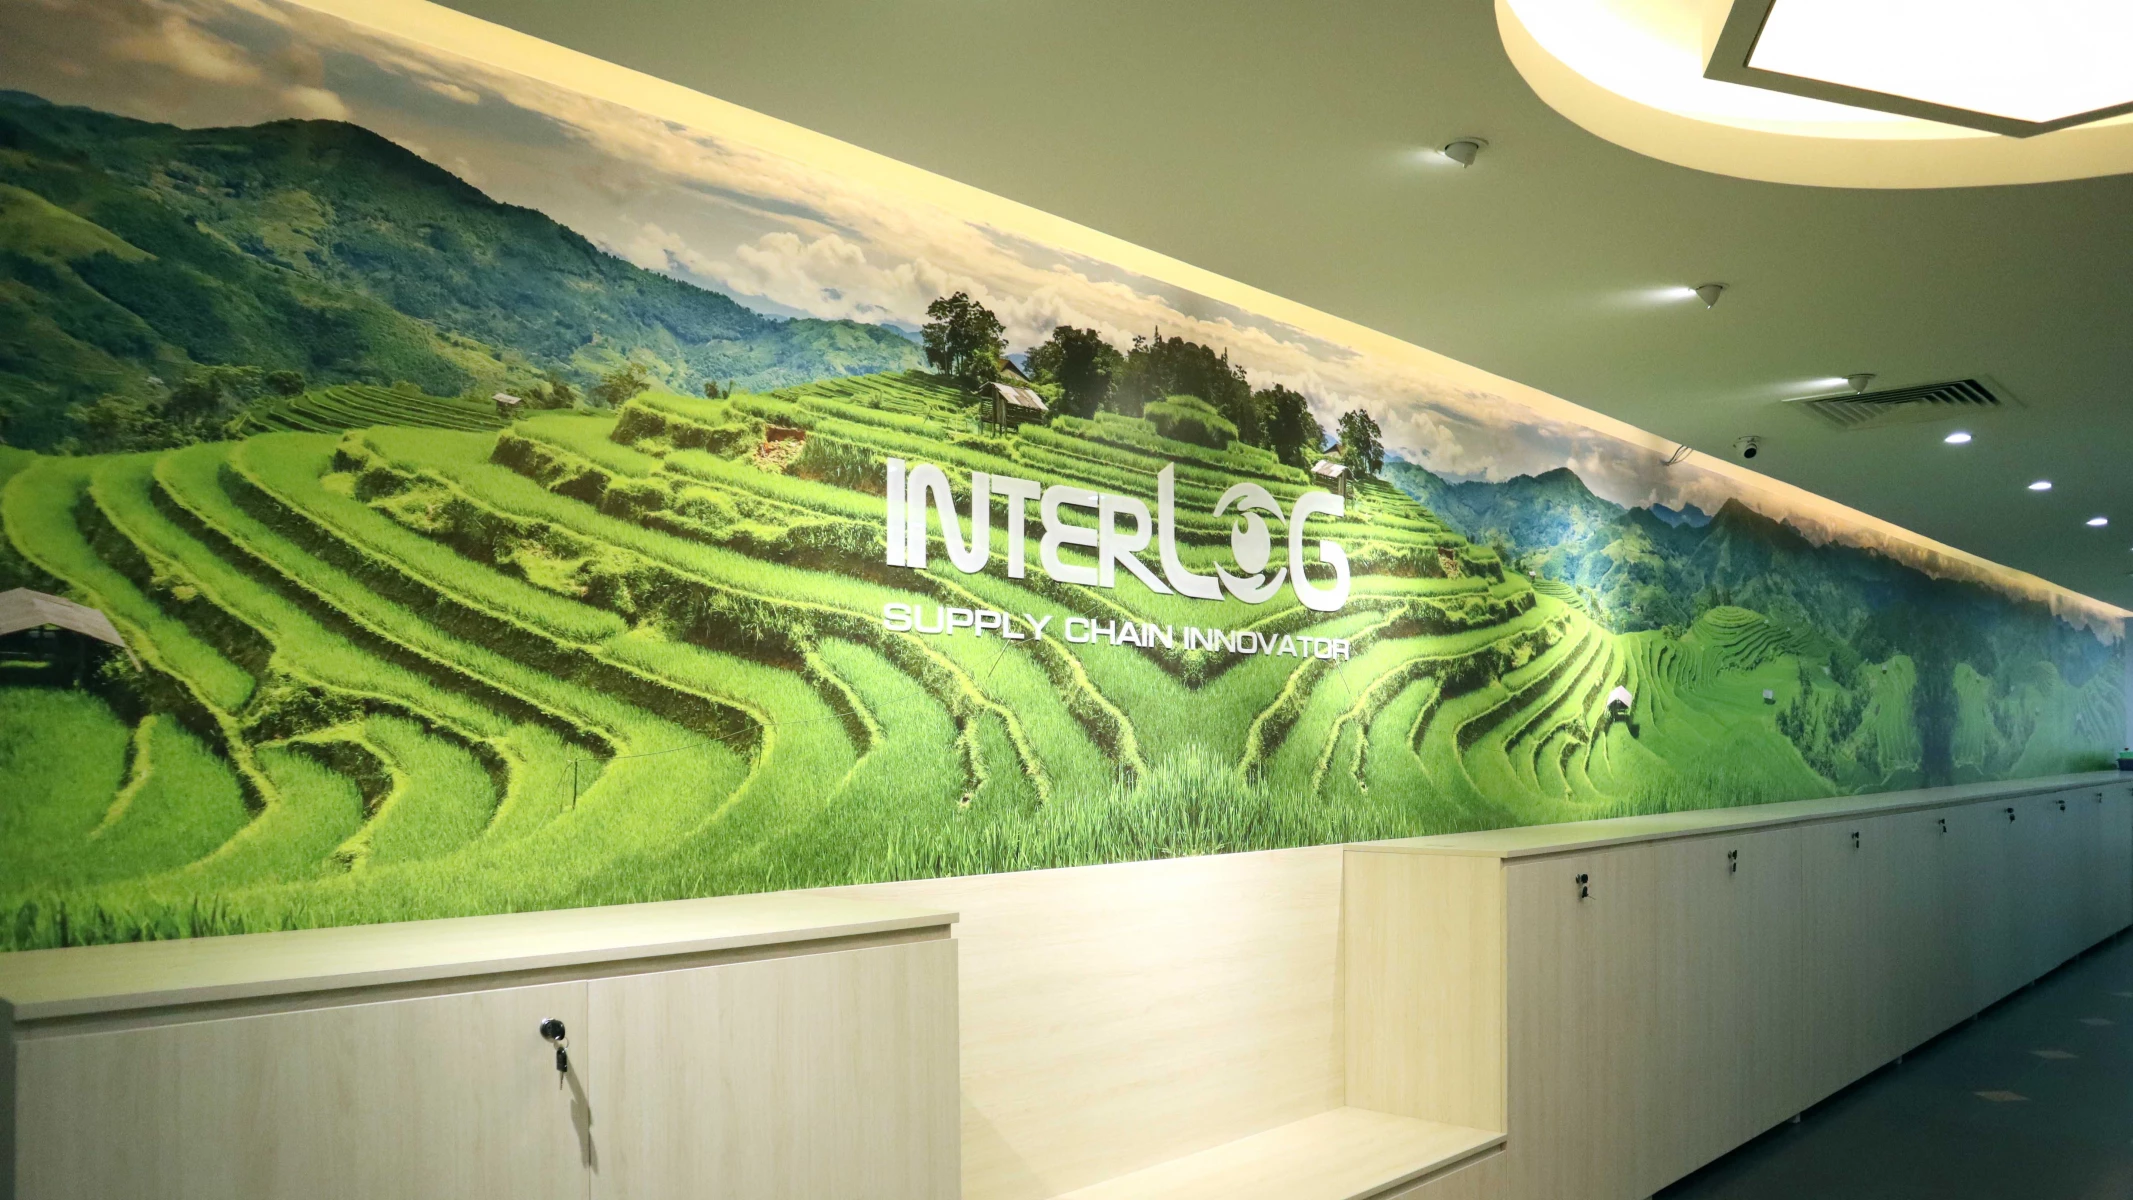 InterLOG renovates a new workspace with Lean - Green & Innovation concept